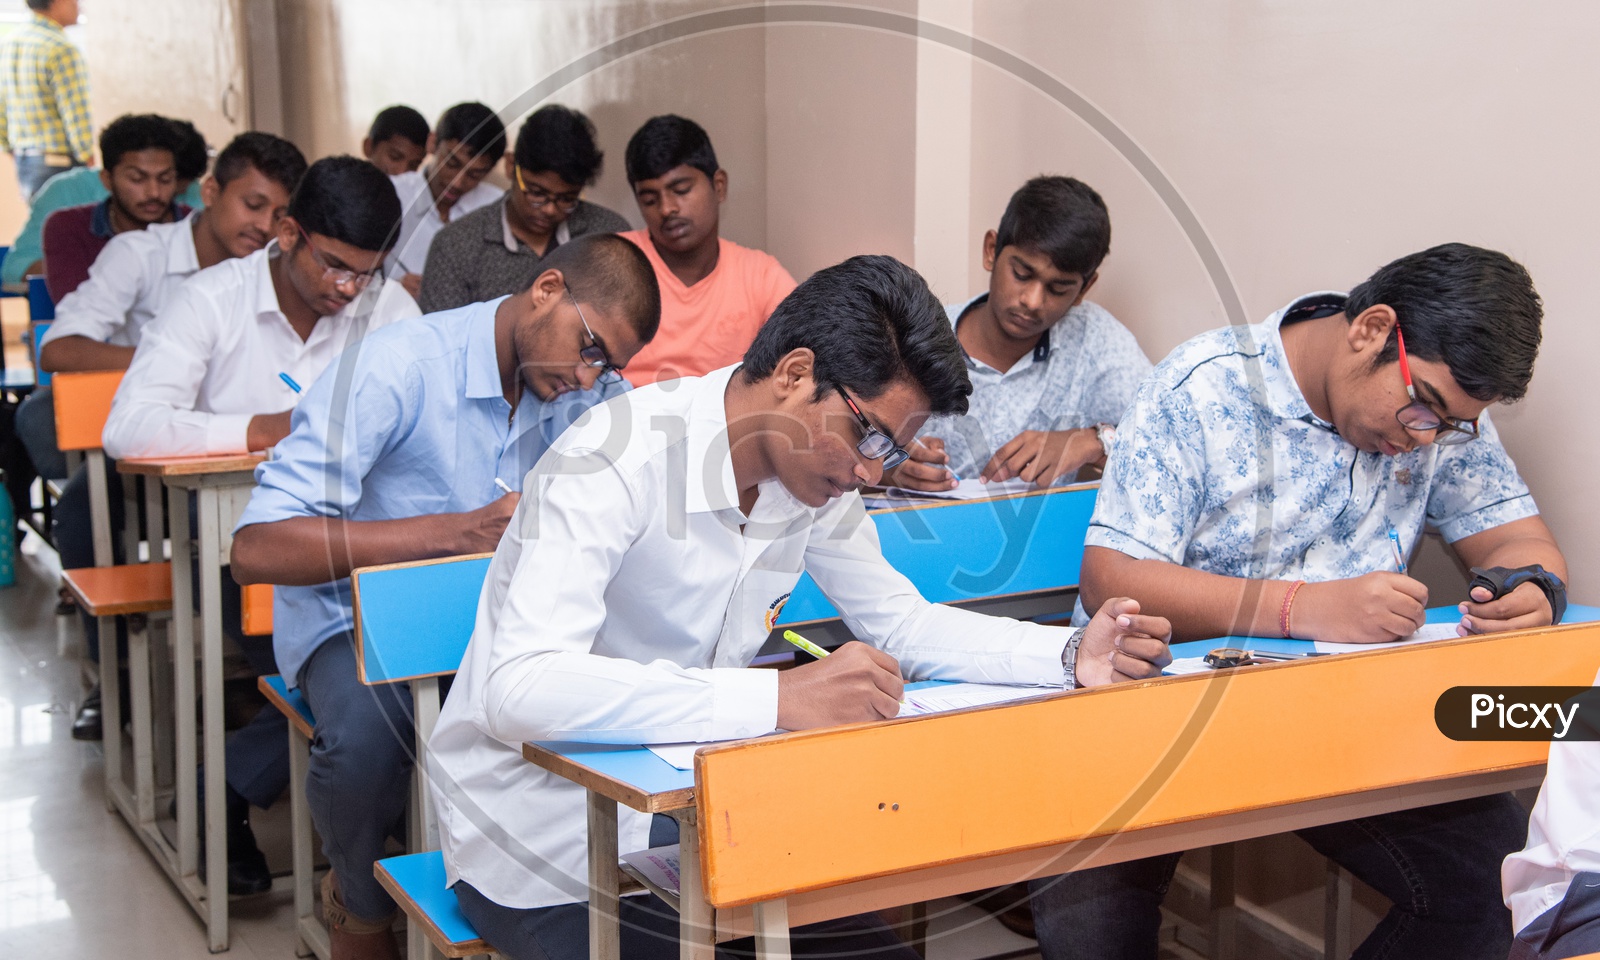 Students in Exam Hall